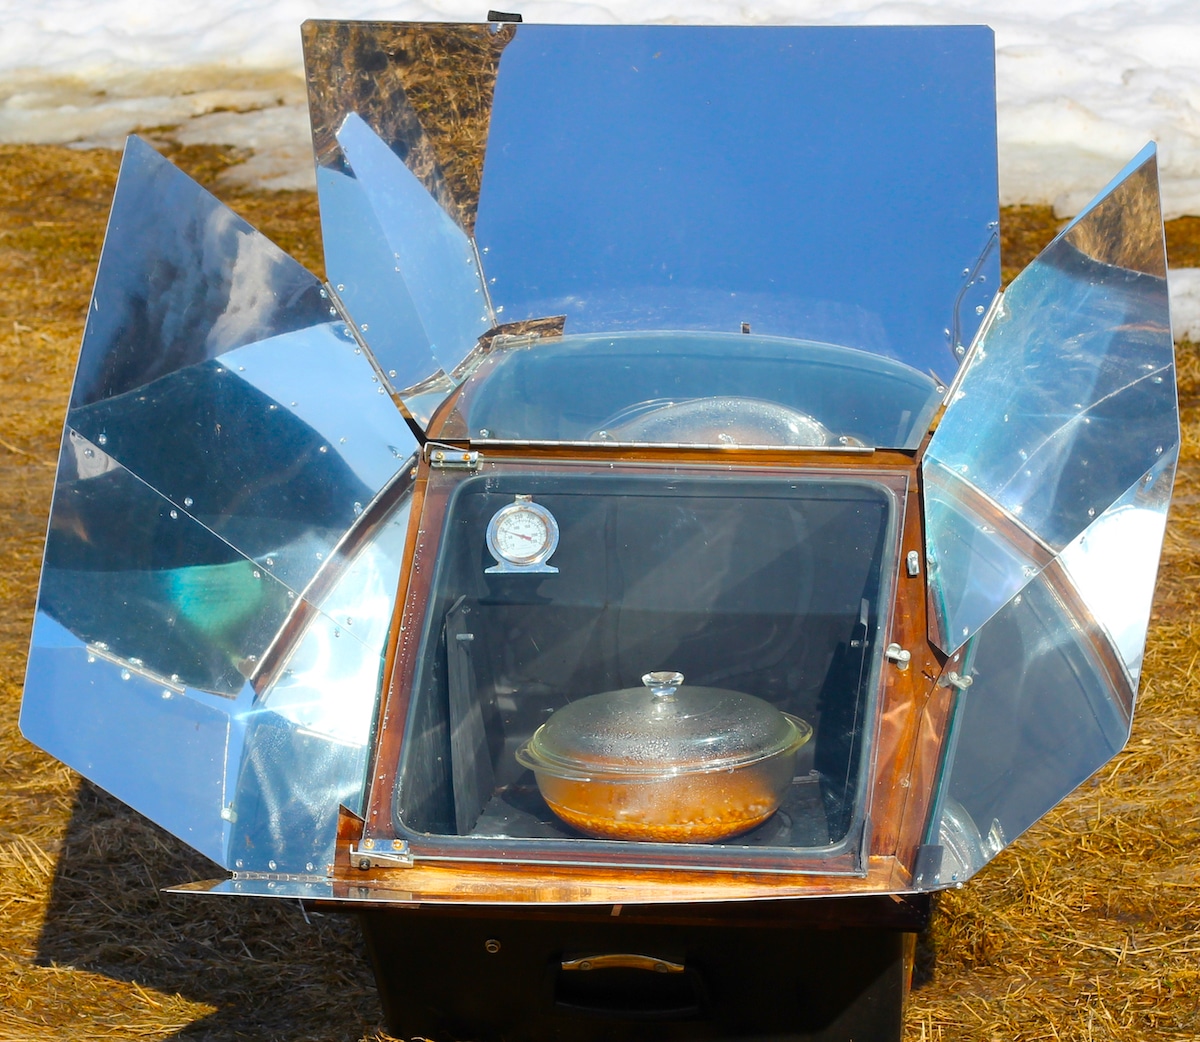 Cooking with a handmade solar oven